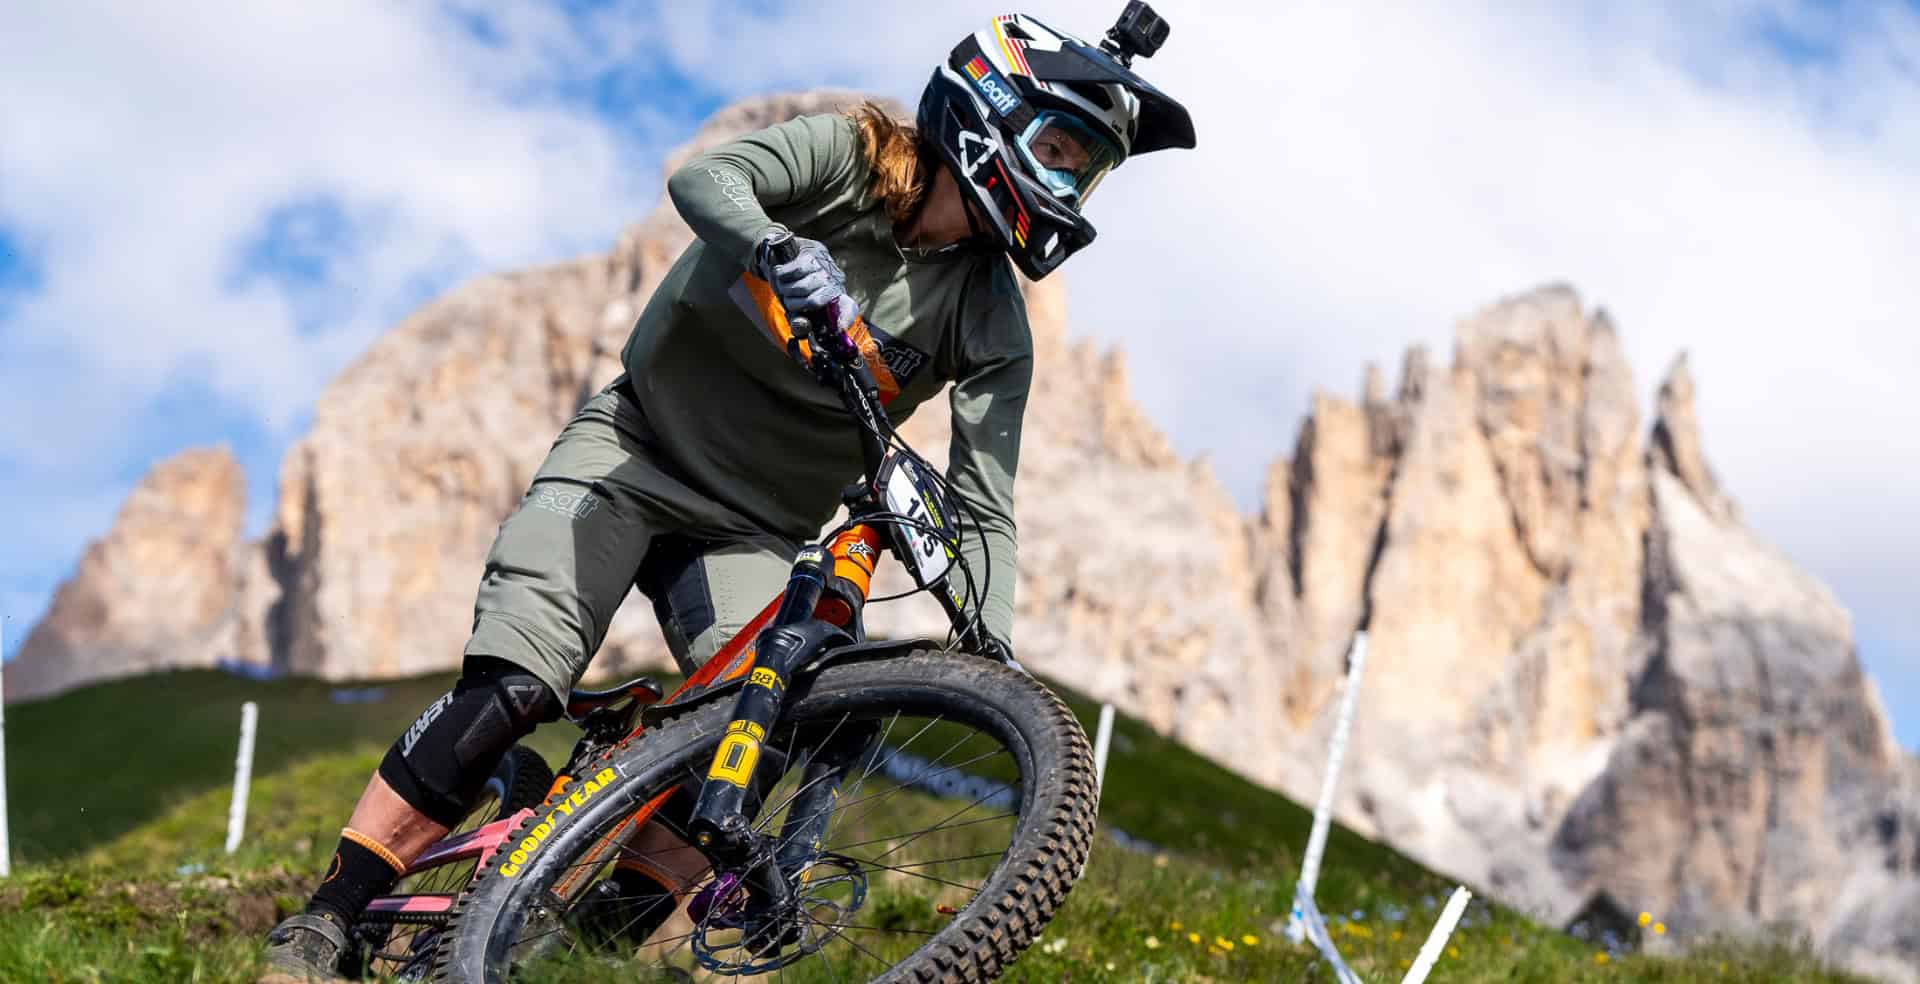 Becky Cook competing on her mountain bike